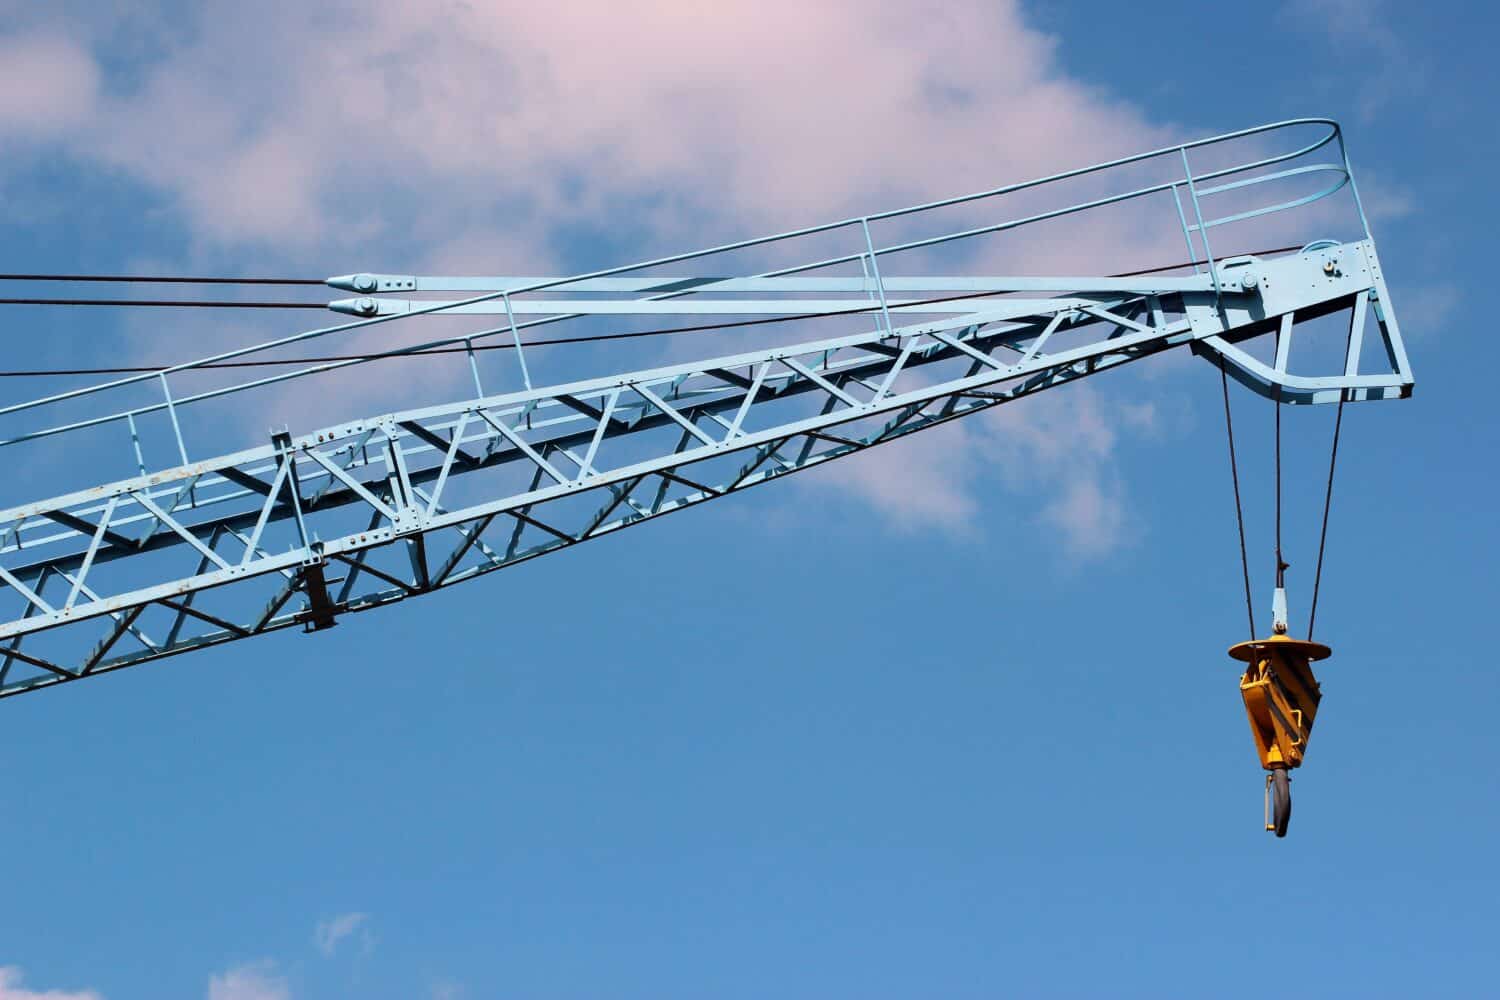 Construction crane arm with hook against blue sky background